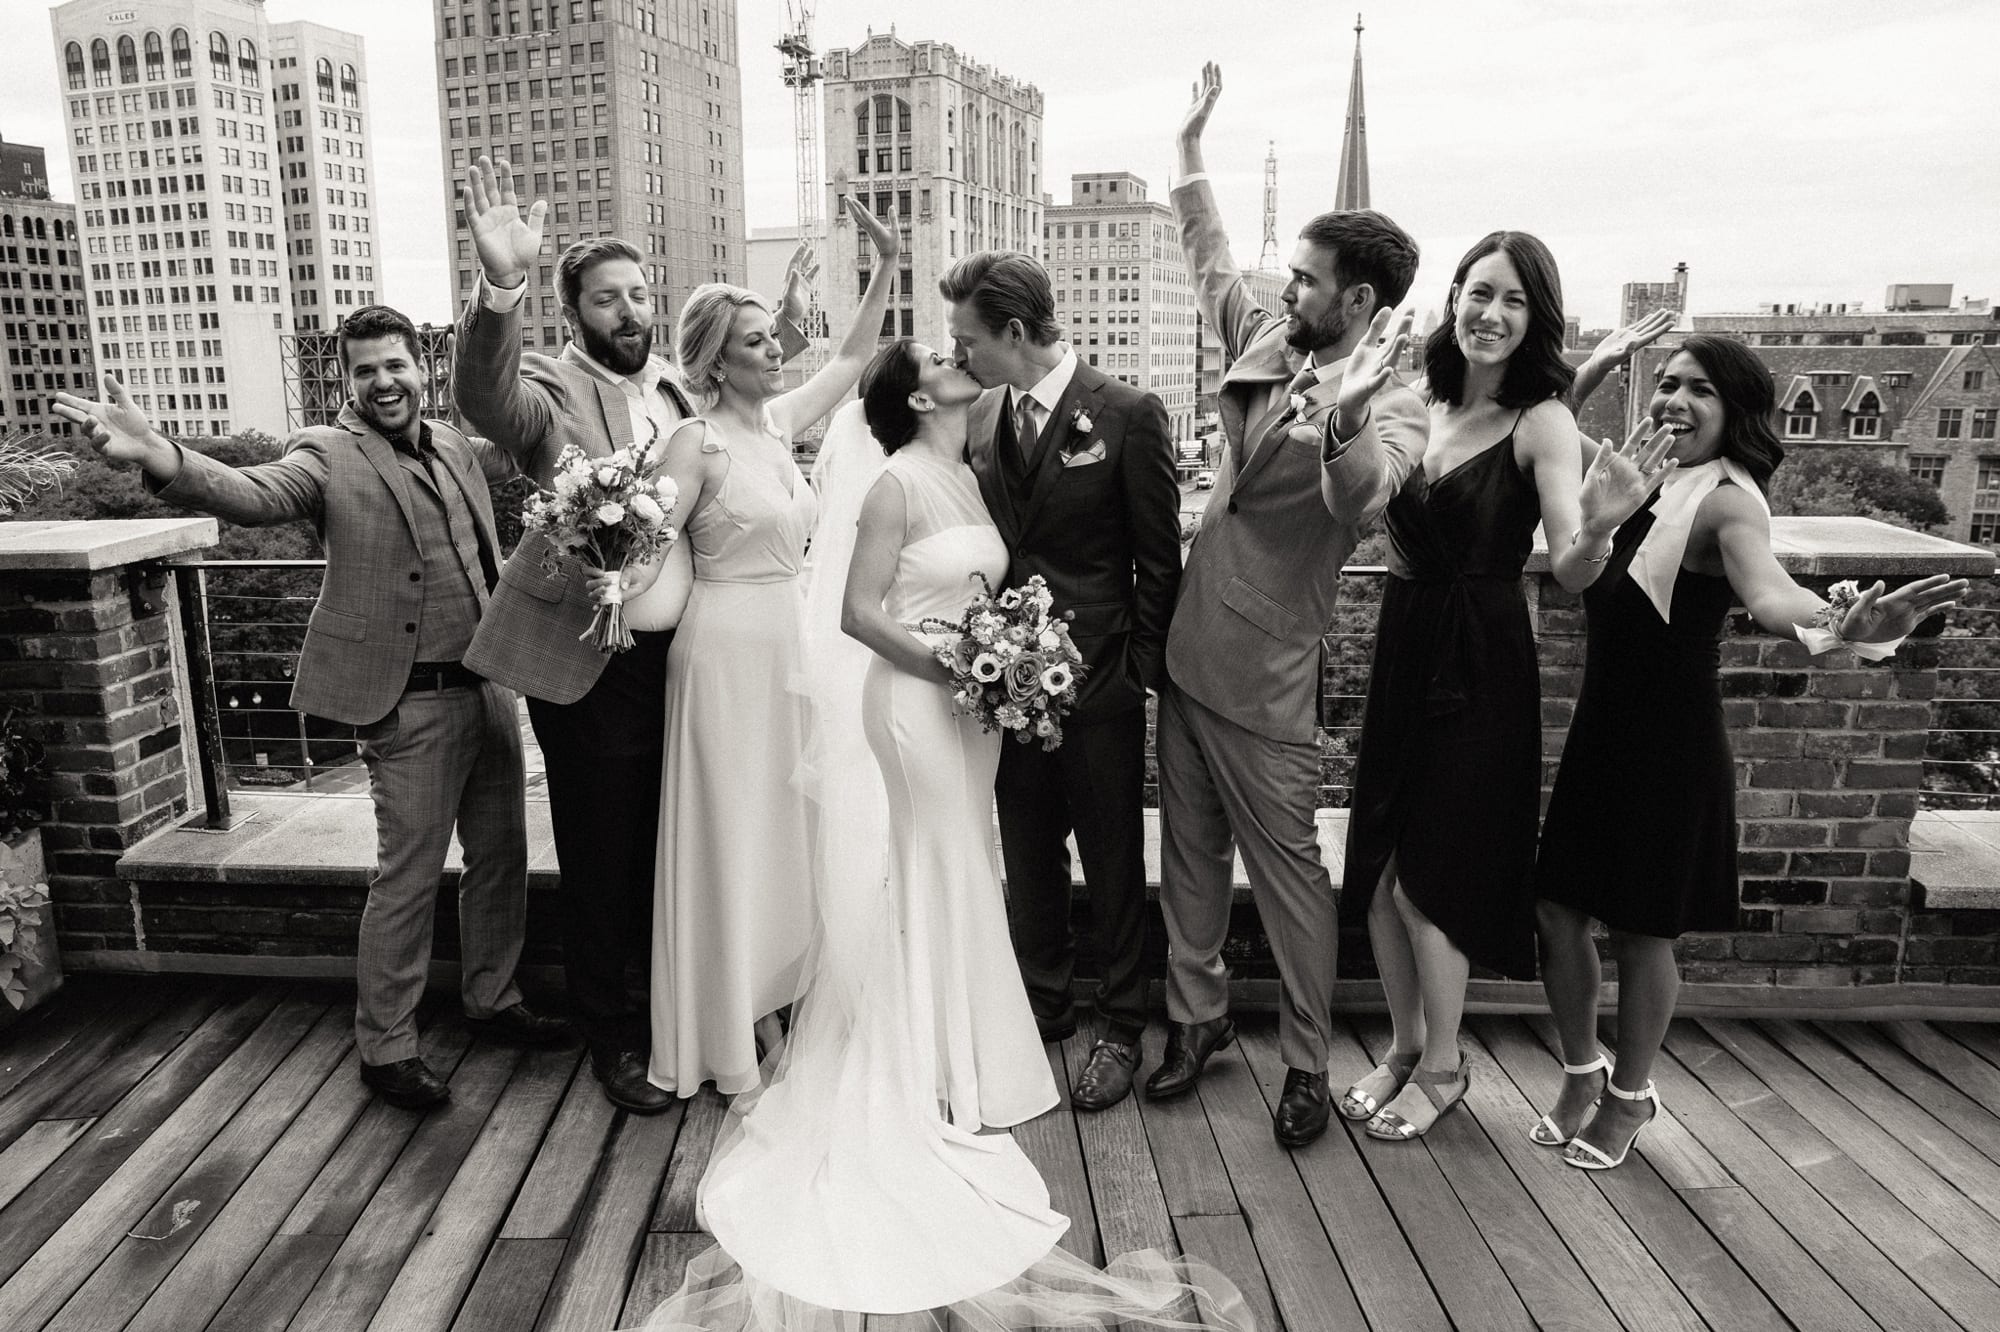 Wedding party photo on the rooftop of the Madison Building